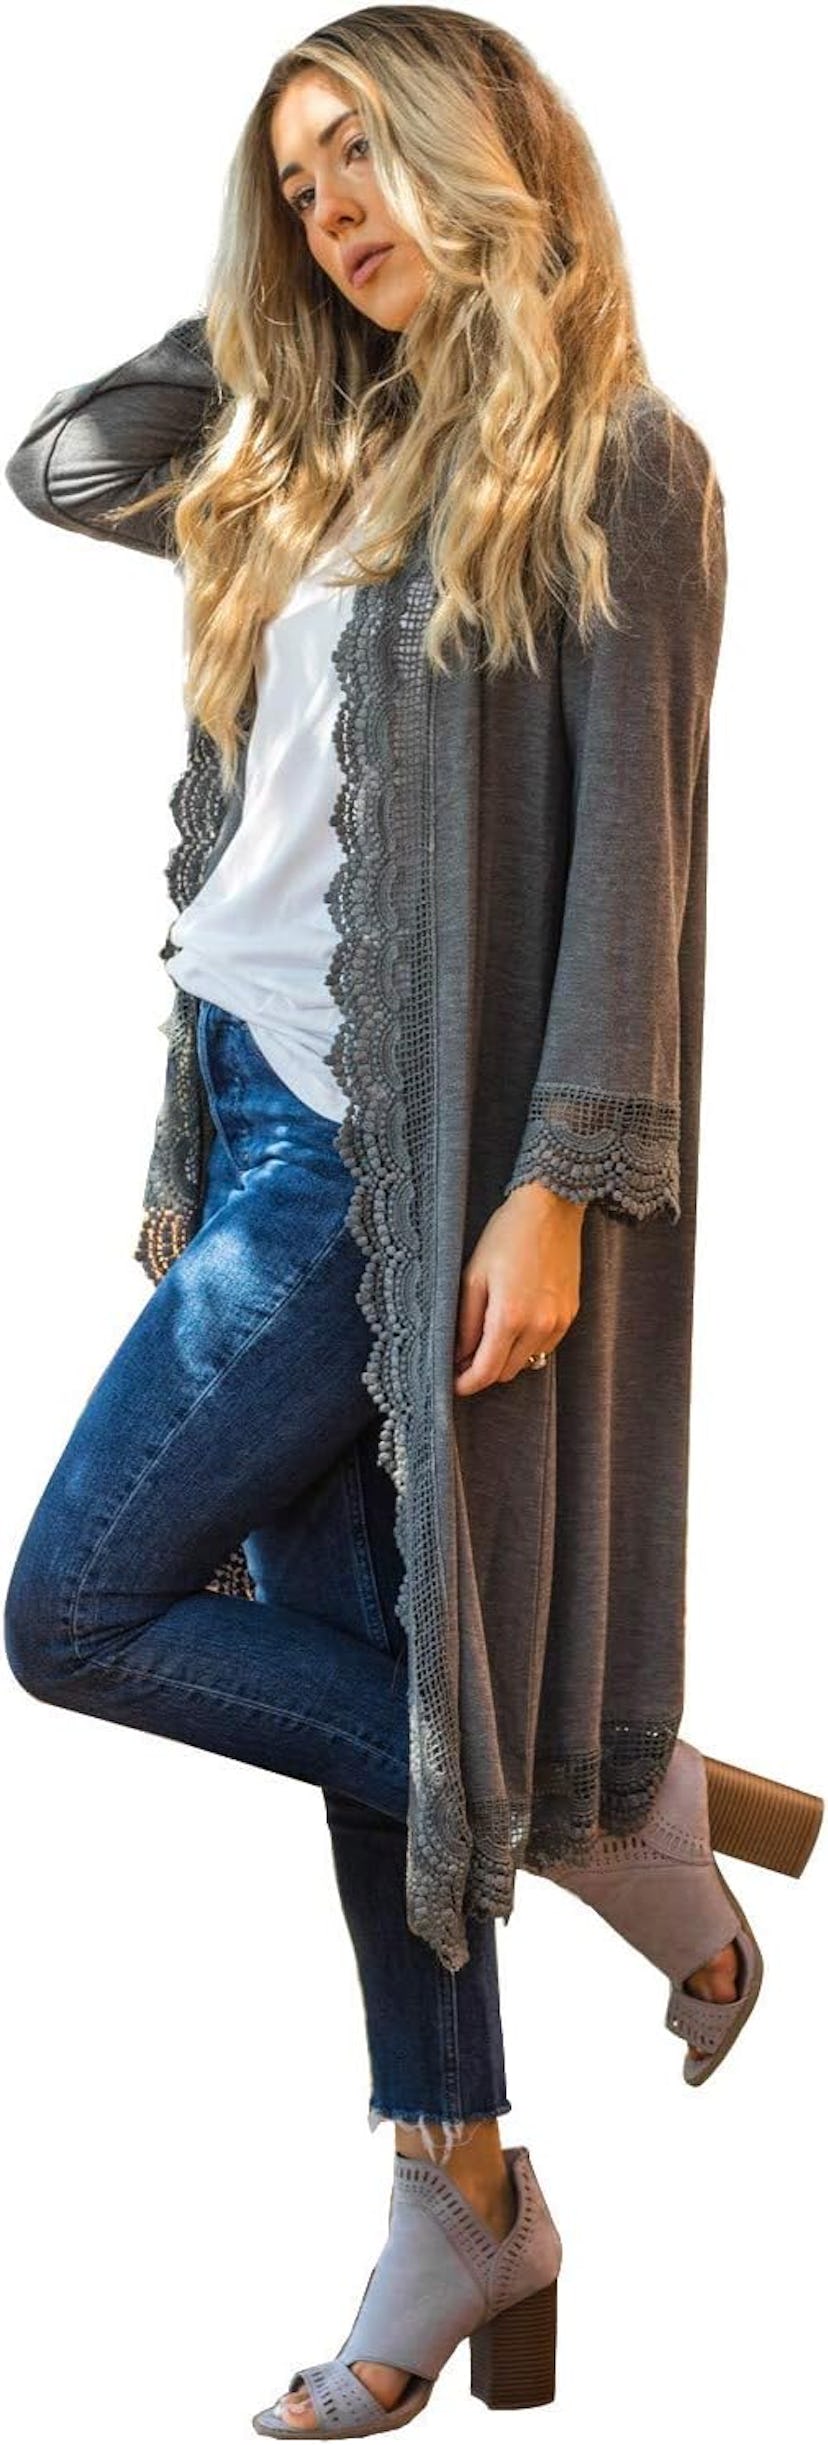 Tickled Teal Lace Trim Cardigan Sweater